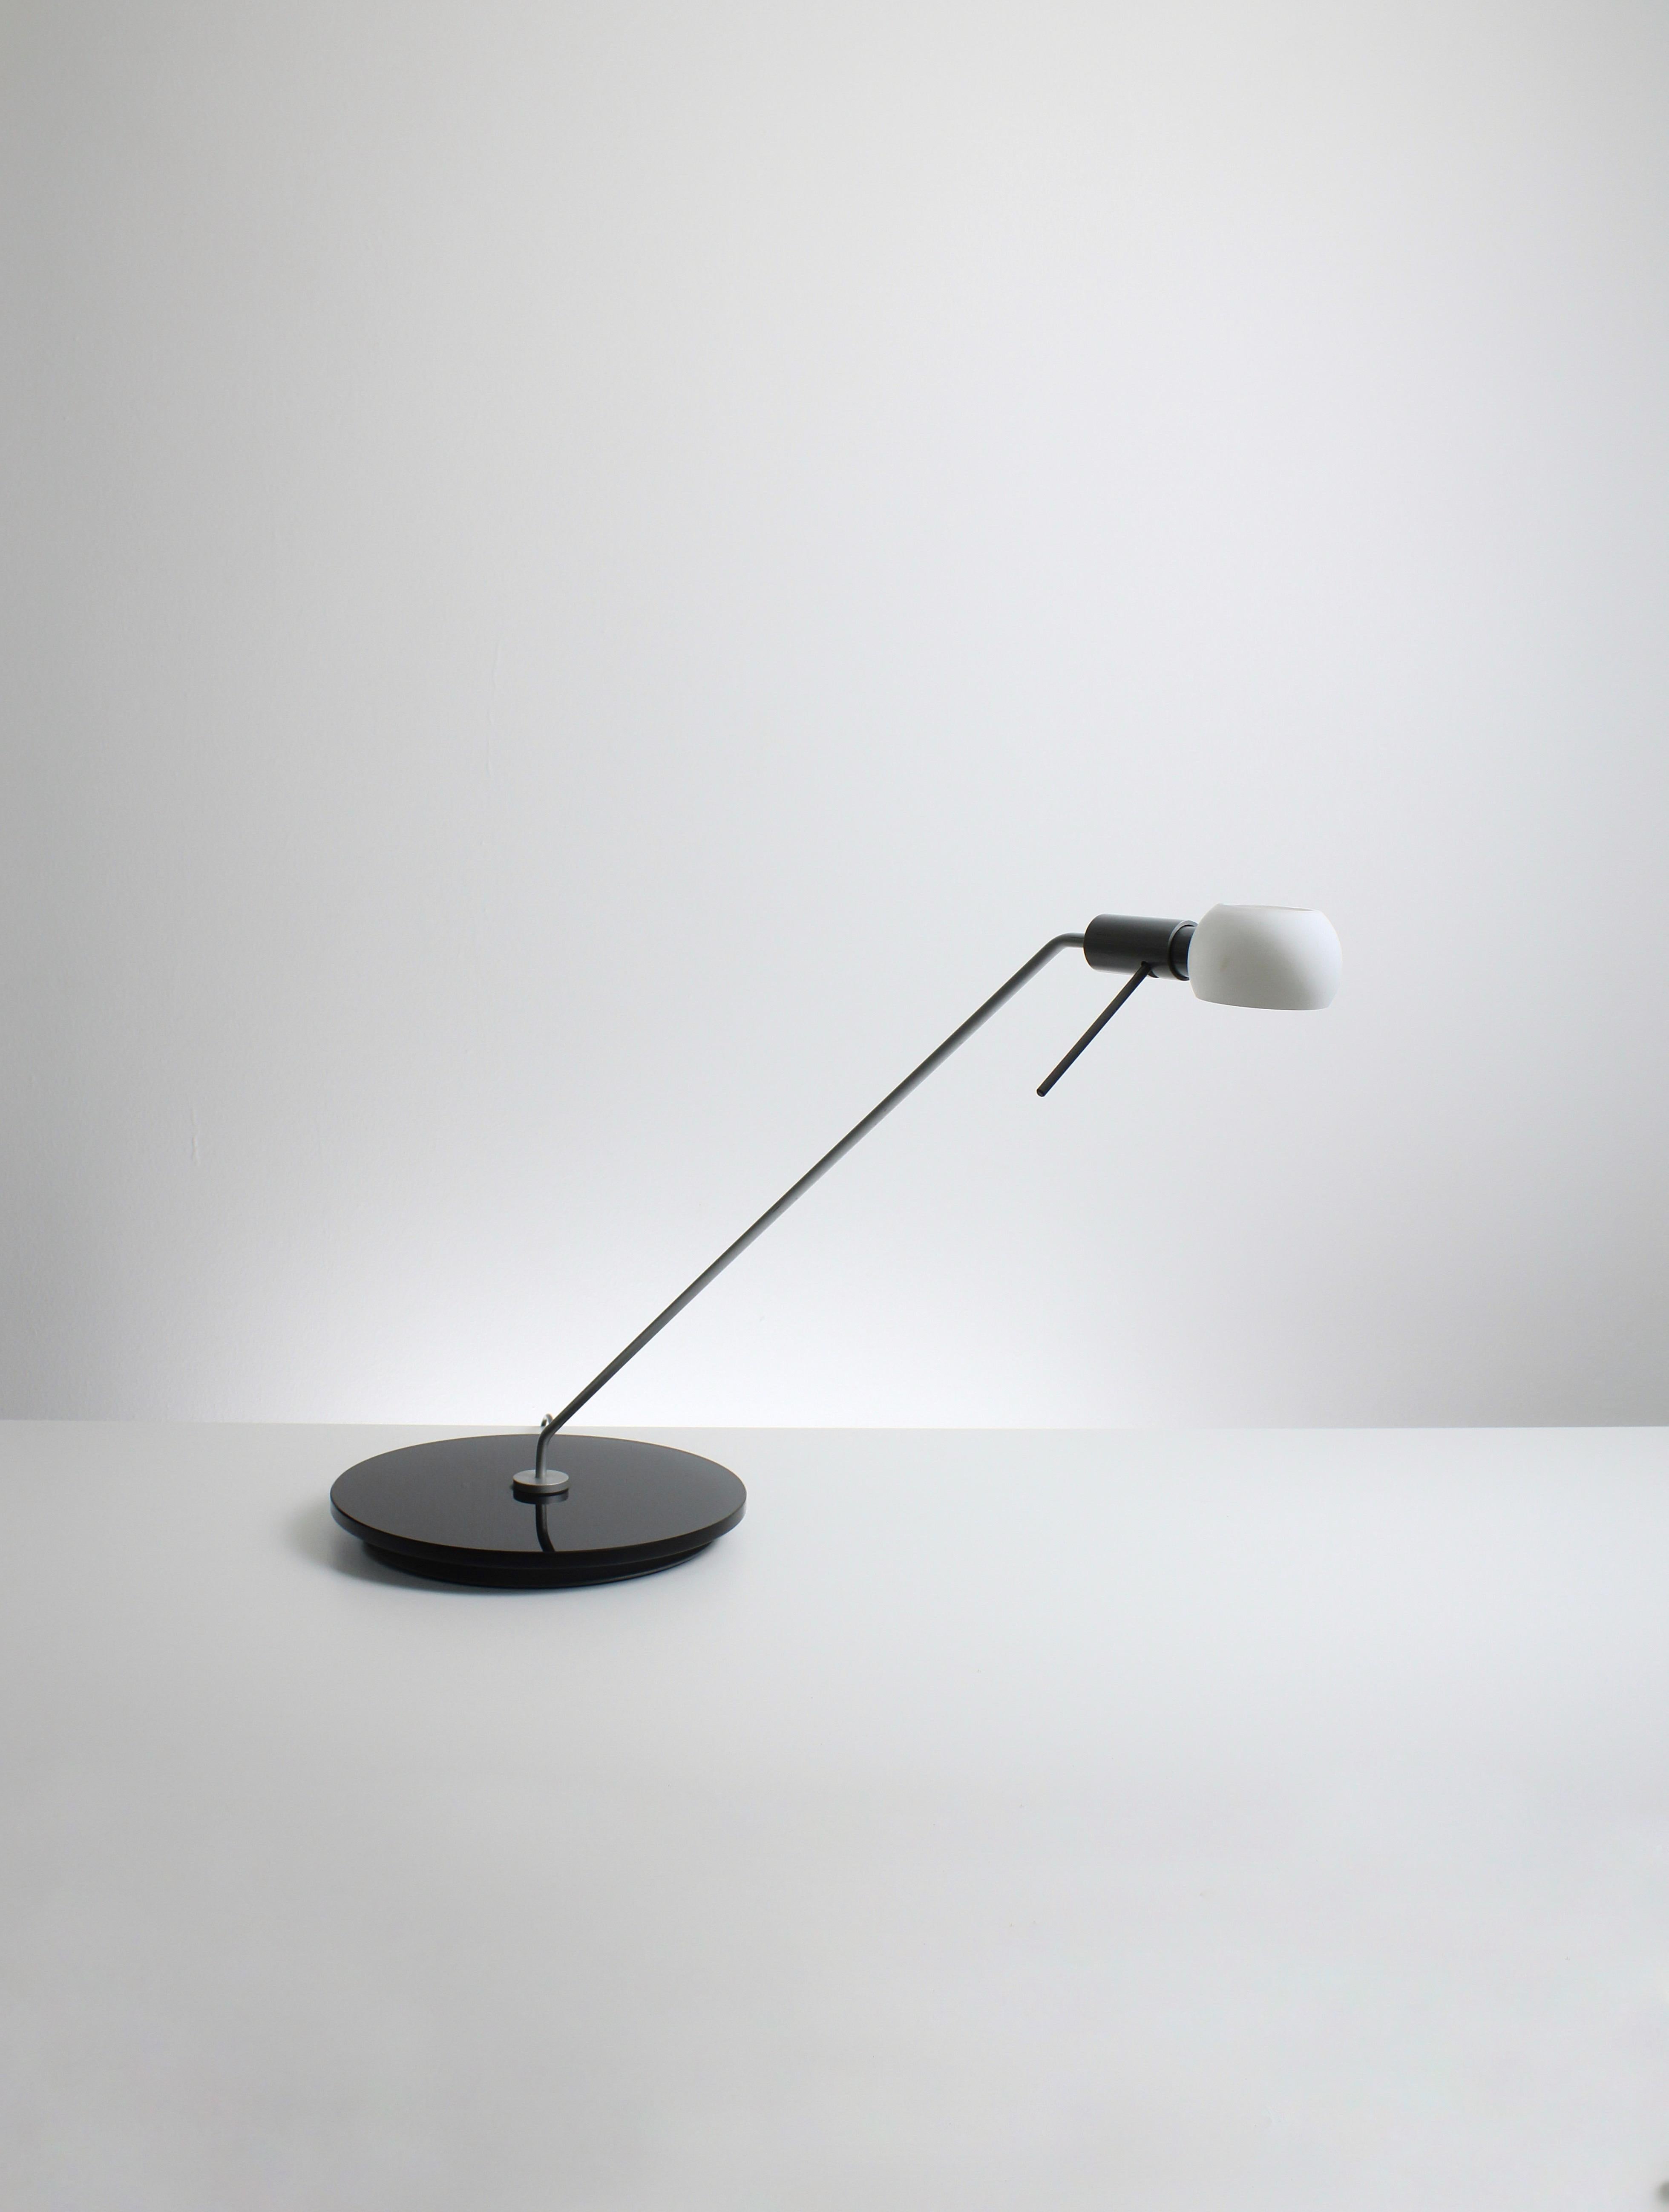 Vega desk lamp, produced by Fontana Arte in the 1980s. This is one of the less-known lamps that Michele De Lucchi designed. At the beginning of his career, Michele worked for Artemide and Memphis. During that time, he designed the Toledo desk lamp.